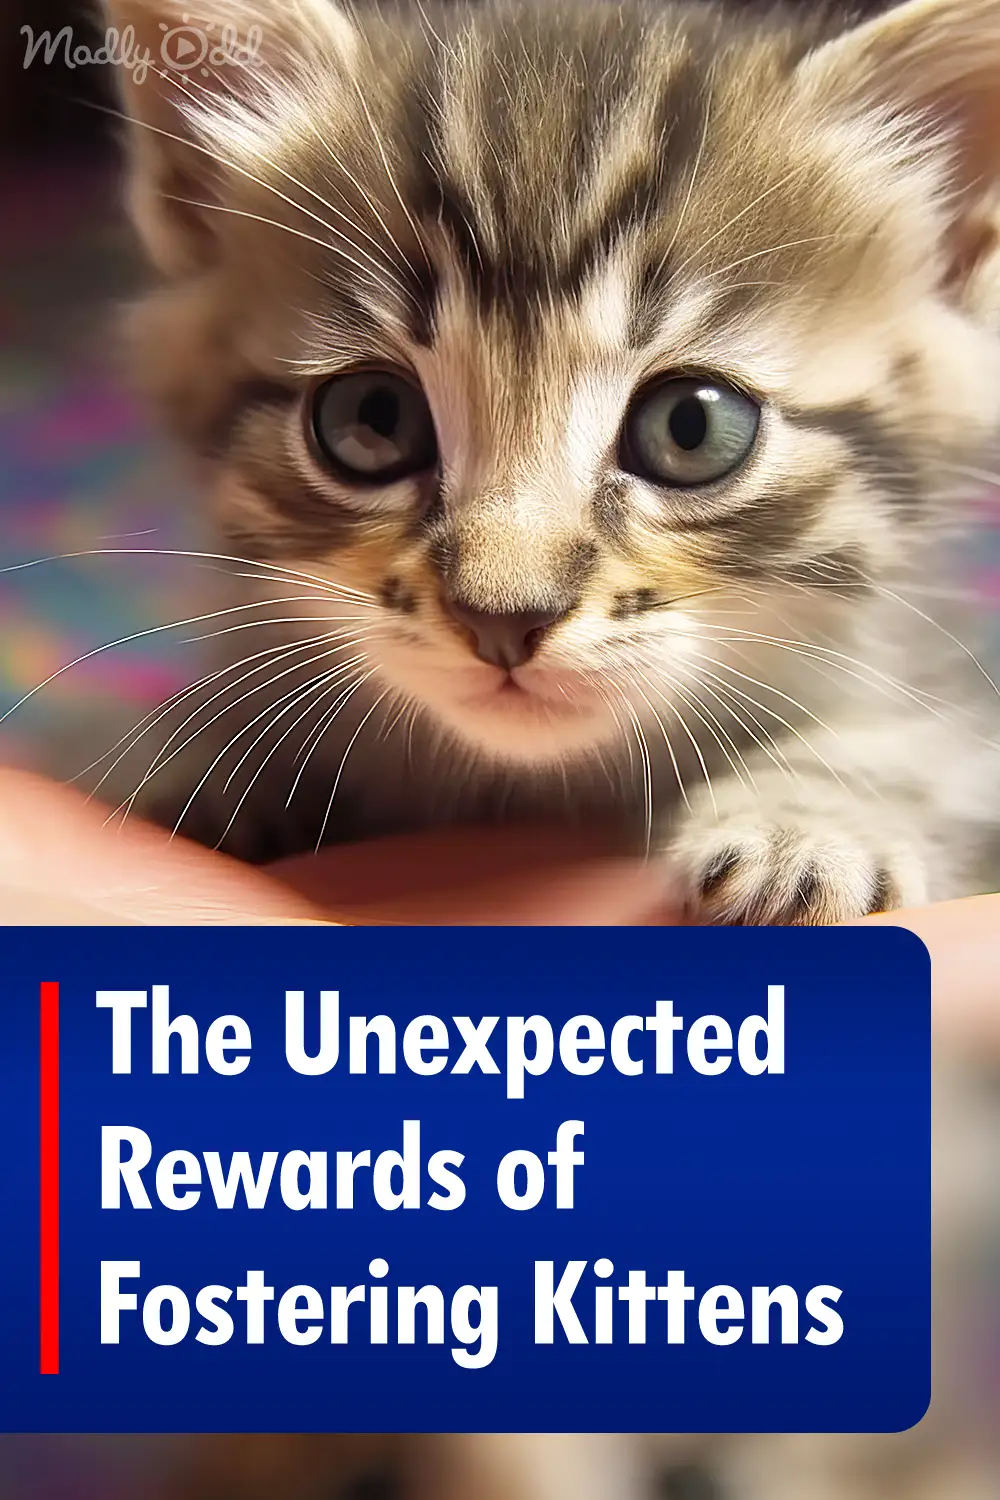 The Unexpected Rewards of Fostering Kittens